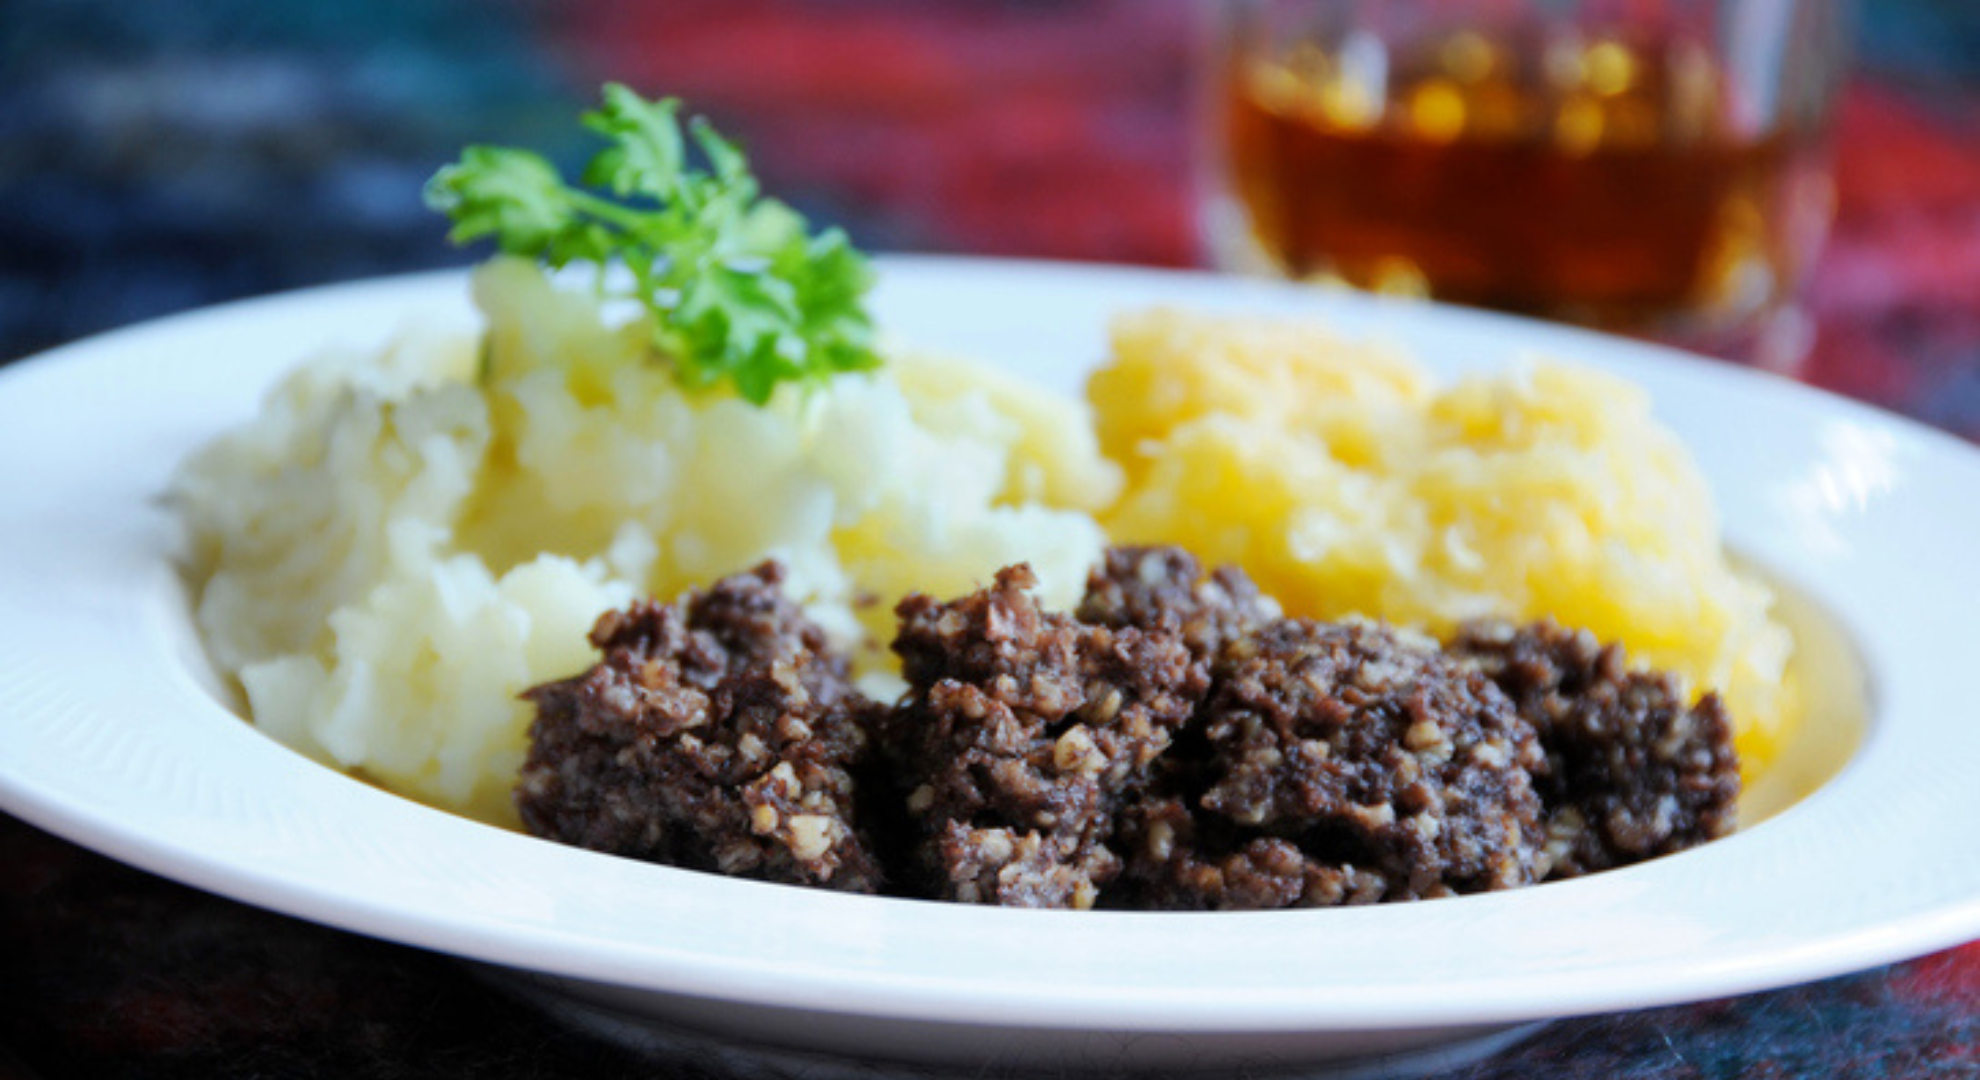 Scottish meal of Haggis, neeps and tatties - and of course a wee dram.